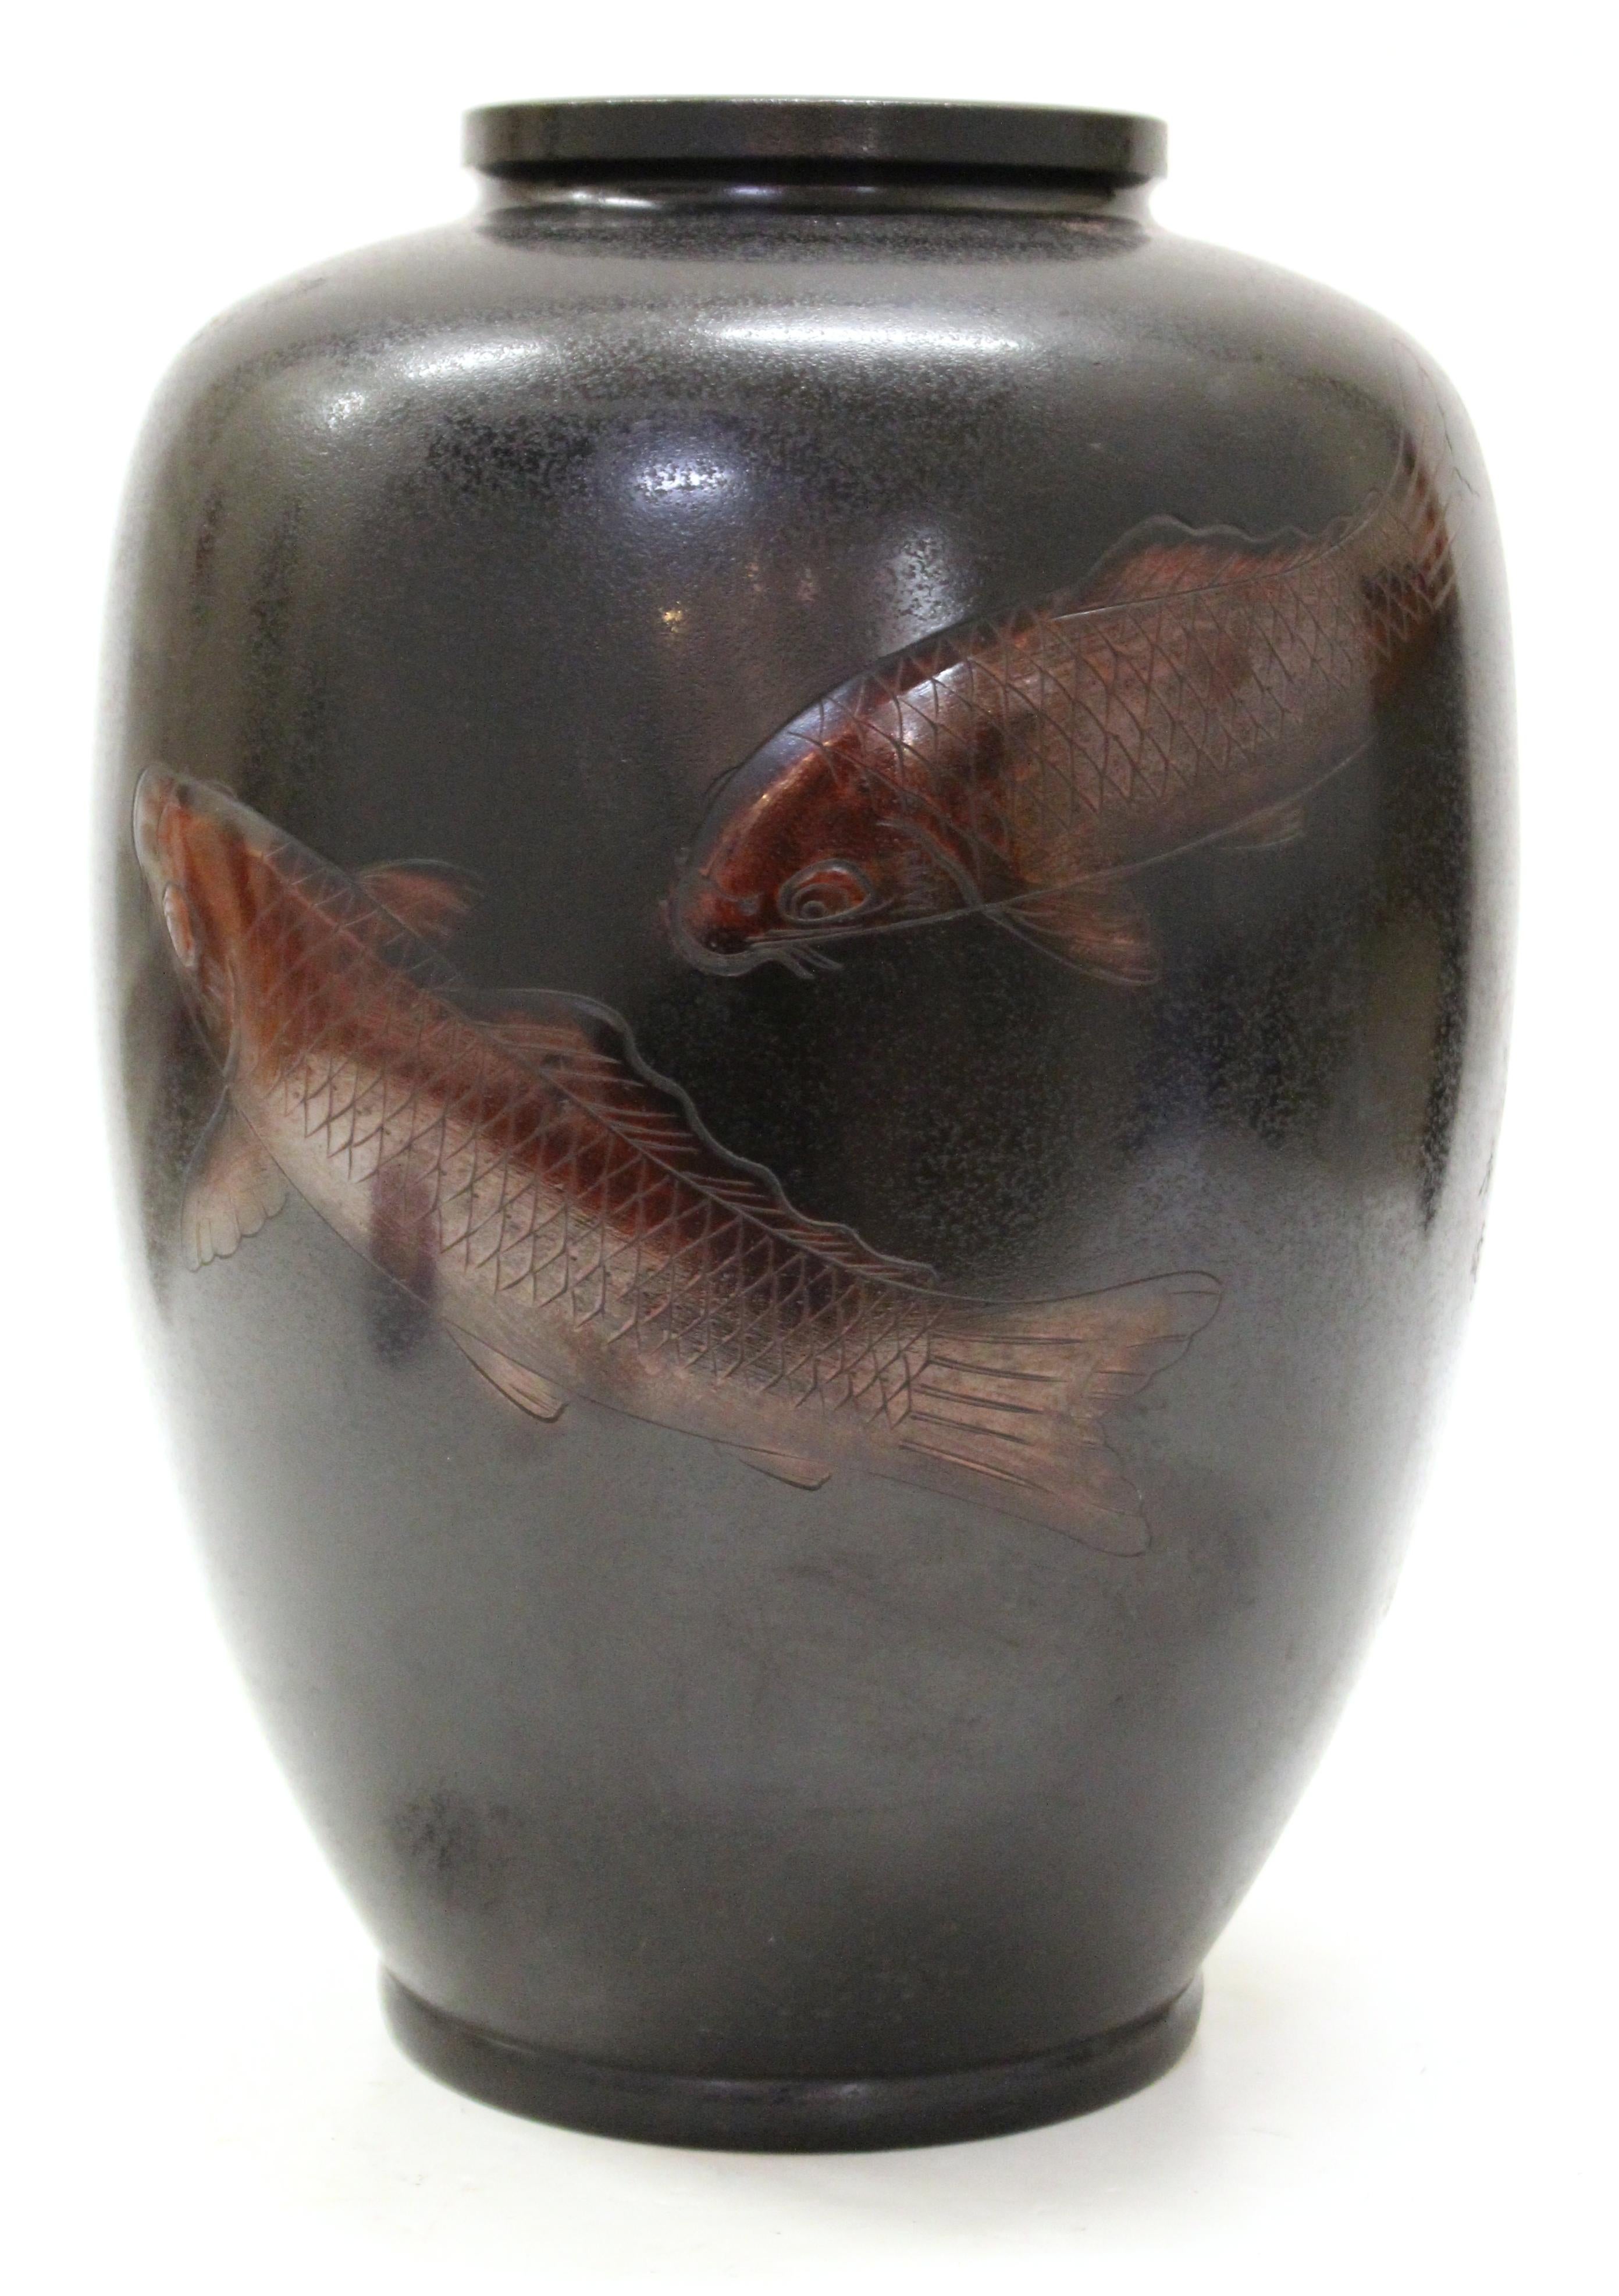 Japanese Art Deco period heavy bronze vase with two swimming red carps on the front side. The piece was made in the 1930's and is signed twice, one signature on the side and another mark on the bottom. In great vintage condition with desirable